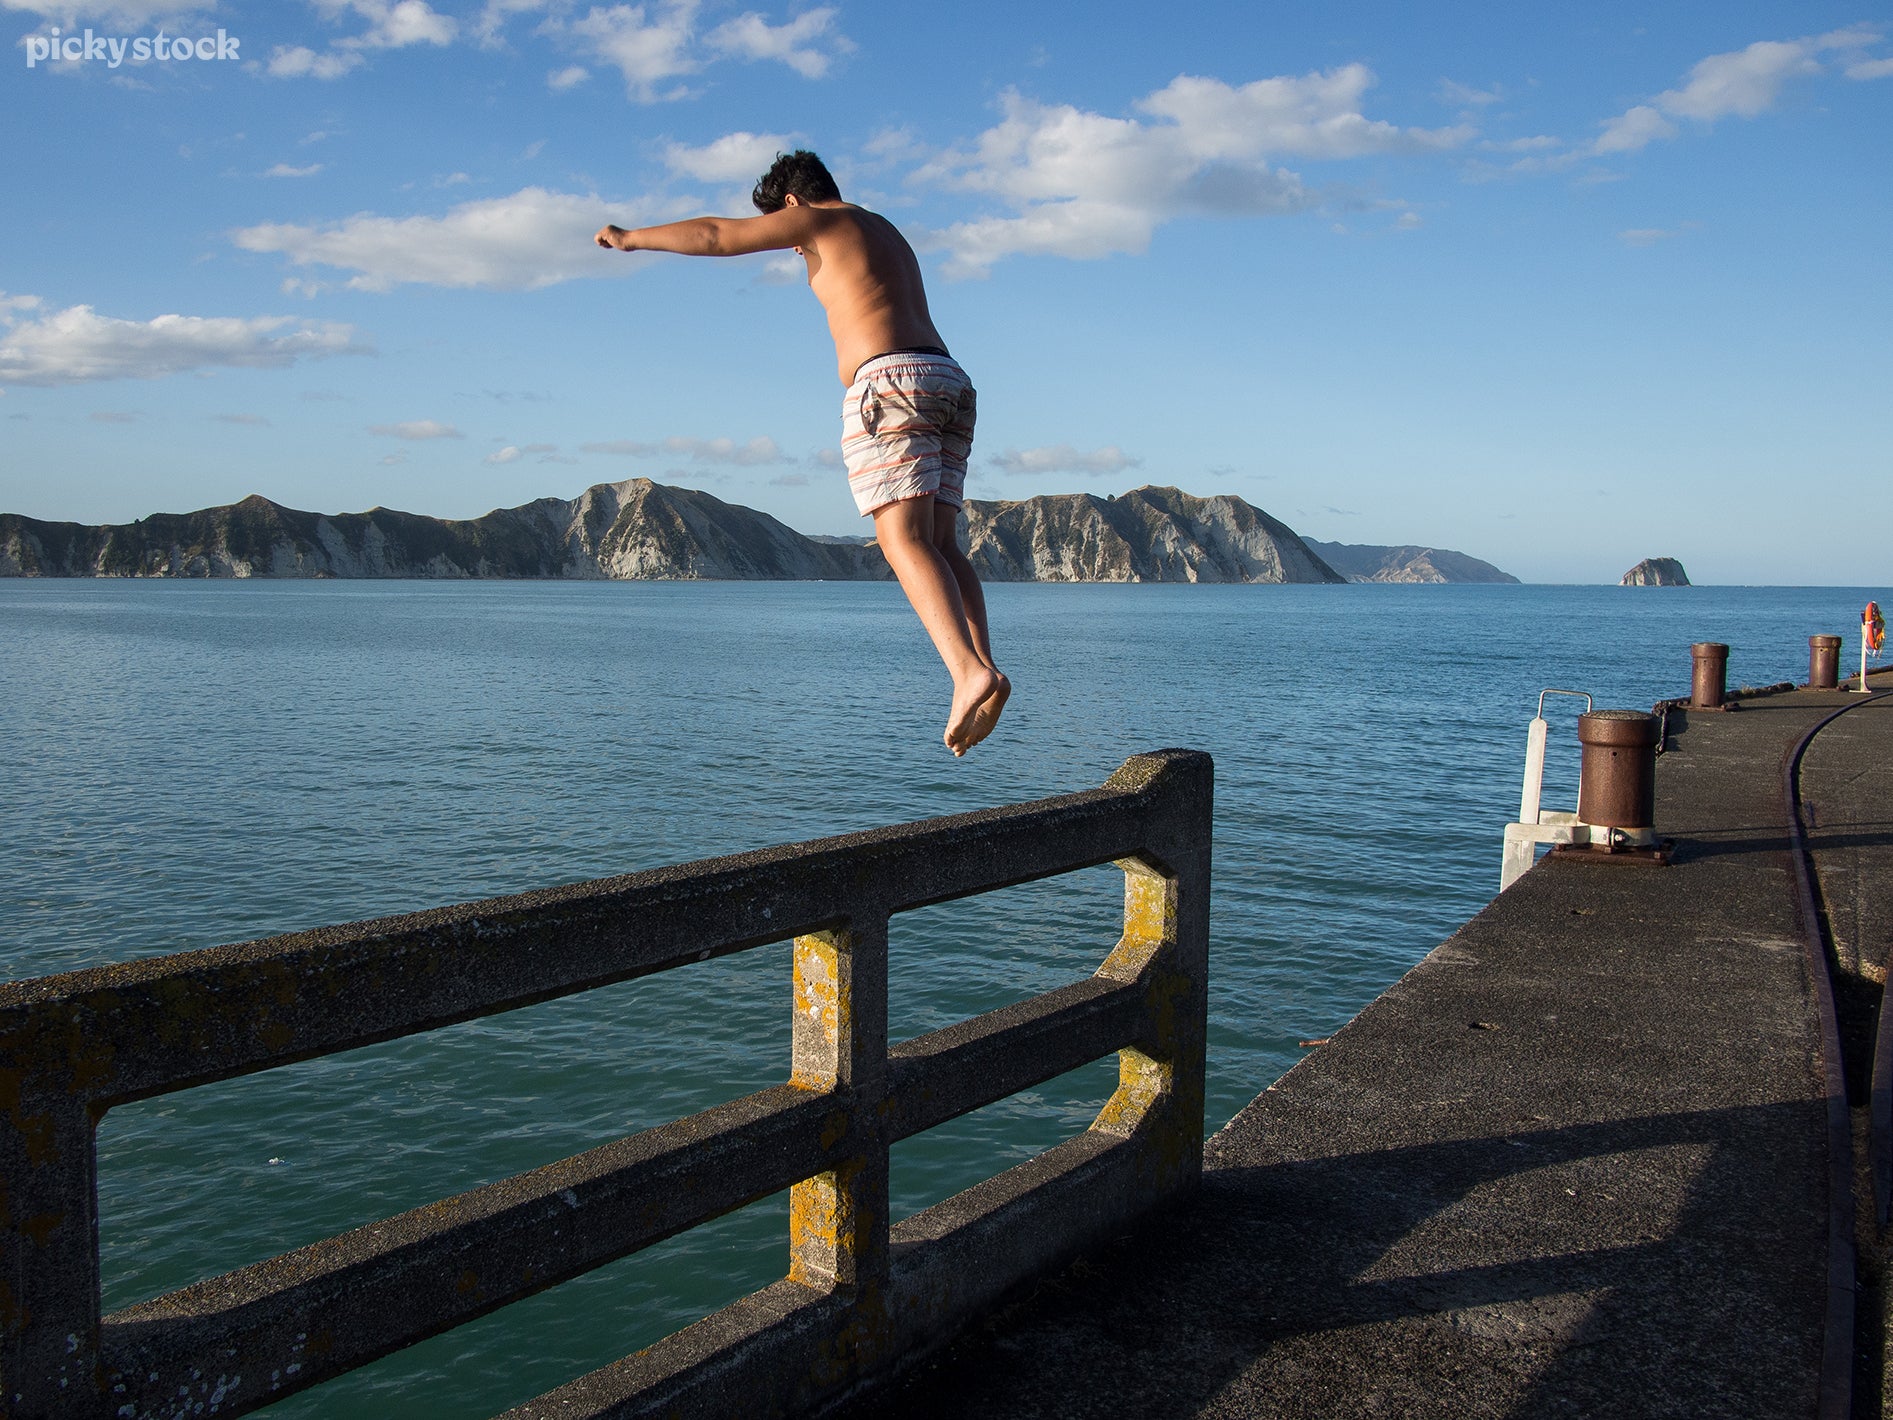 A landscape of a man in swimming trunks leaps into the water from a concrete dock. The sunny sky casts light across the water reflecting off brass cleats and white cliffs.